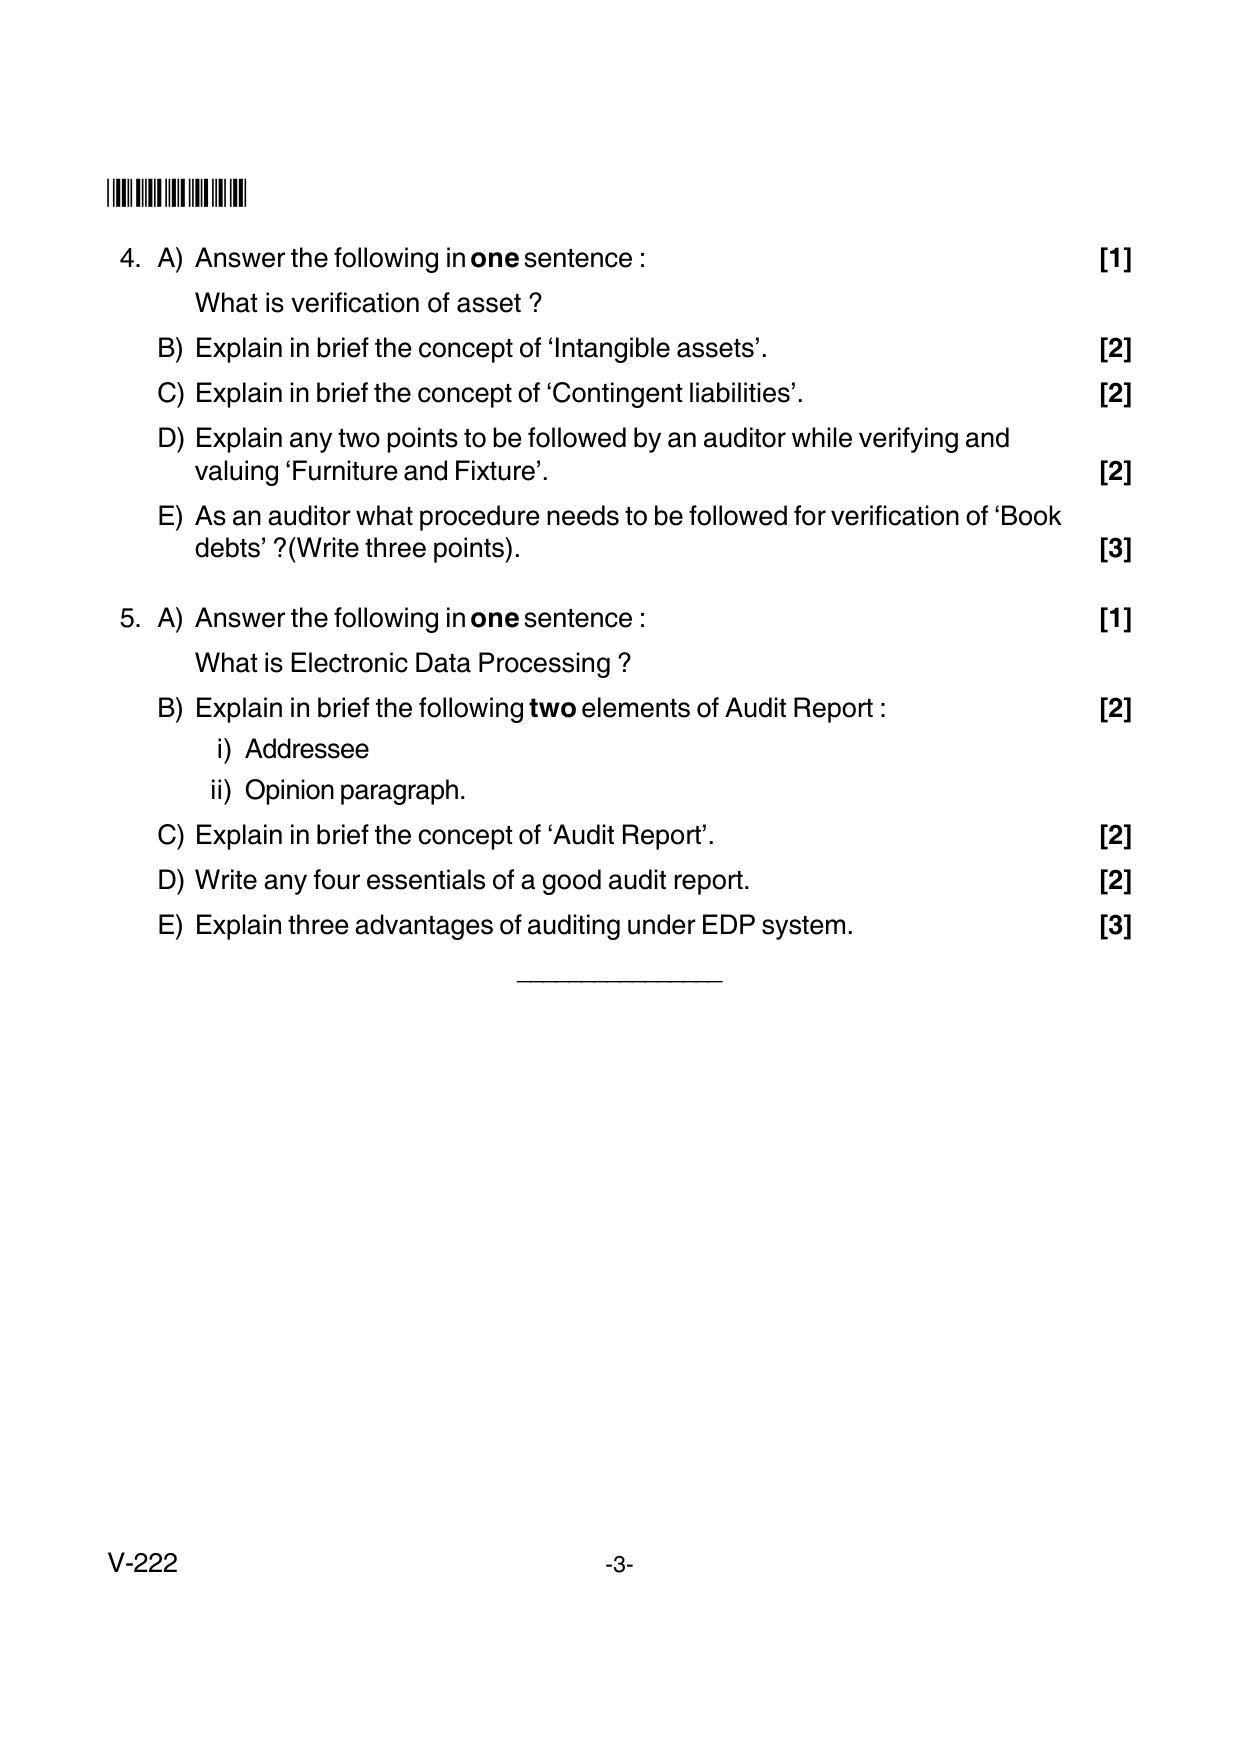 Goa Board Class 12 Principles & Practice of Auditing  Voc 222 New Pattern (March 2018) Question Paper - Page 3